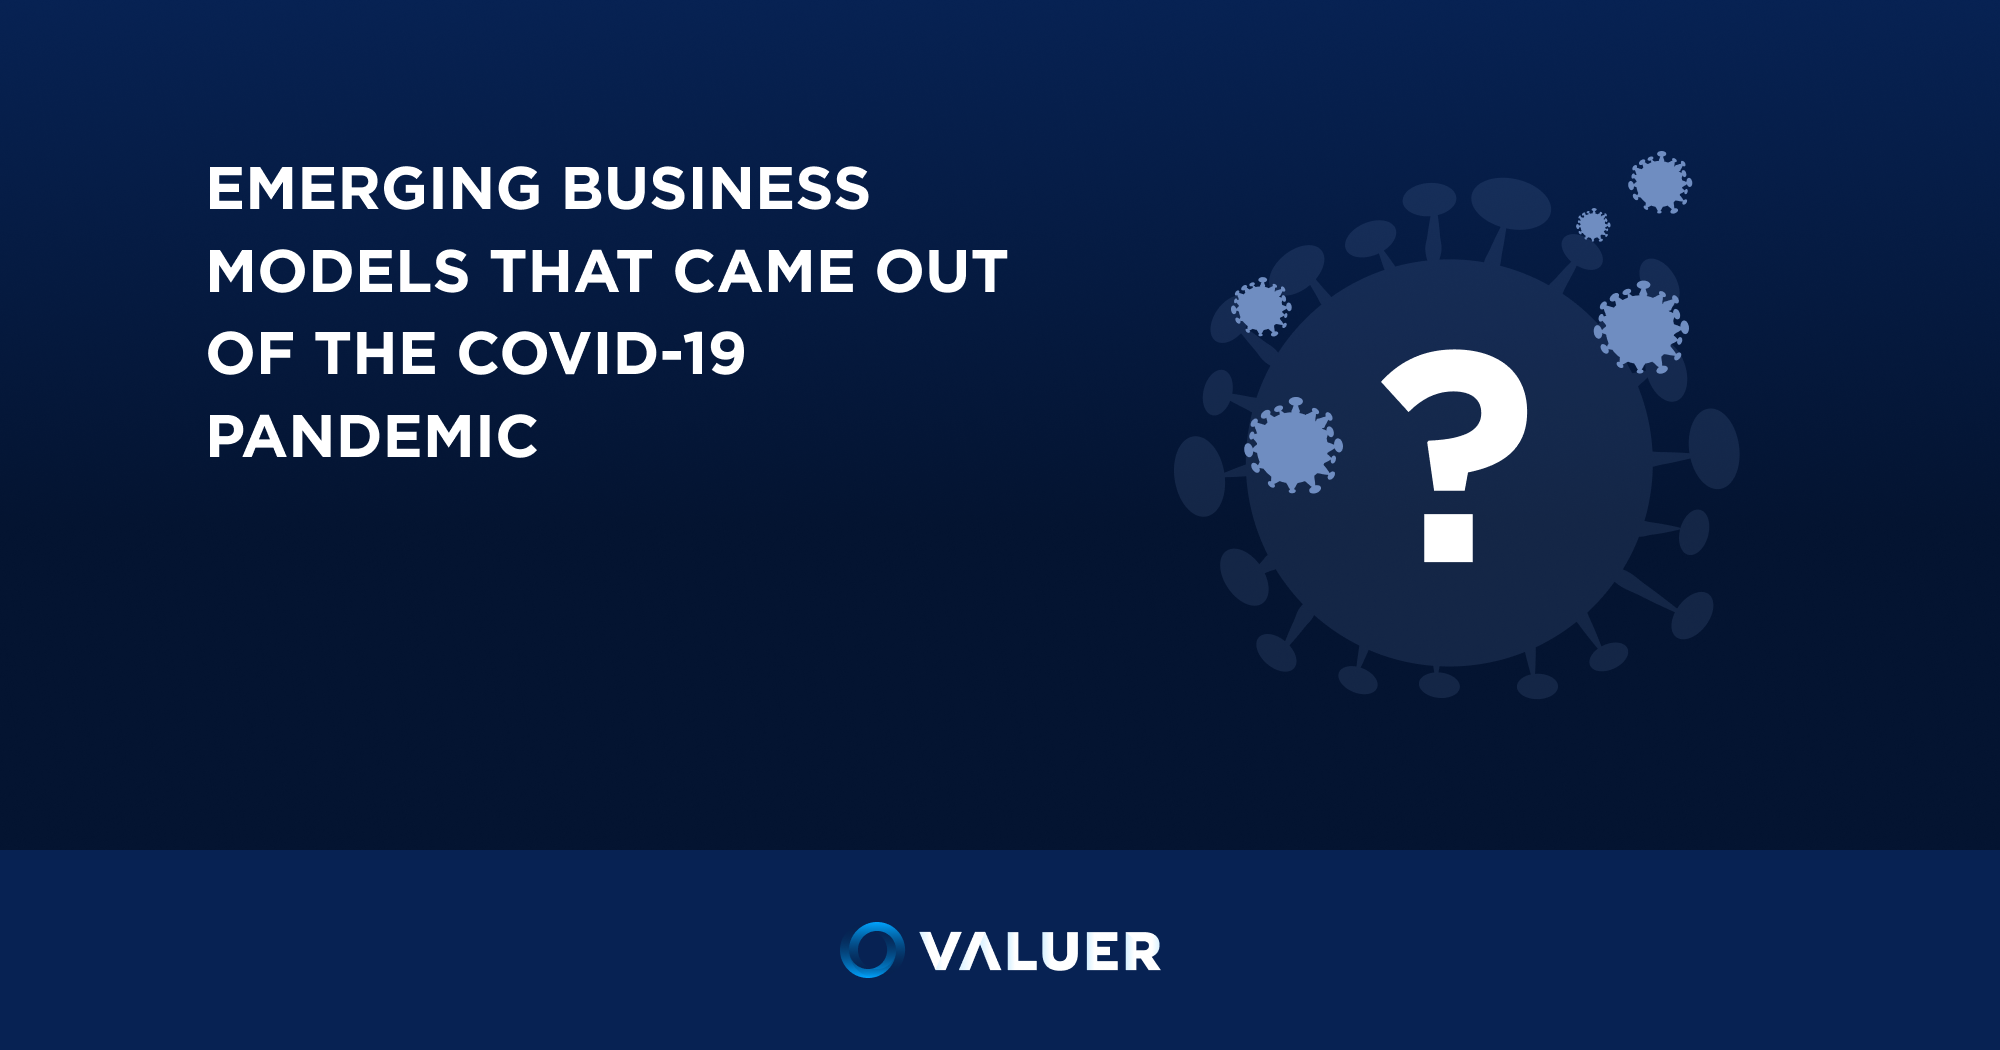 Emerging Business Models That Came Out of the COVID-19 Pandemic